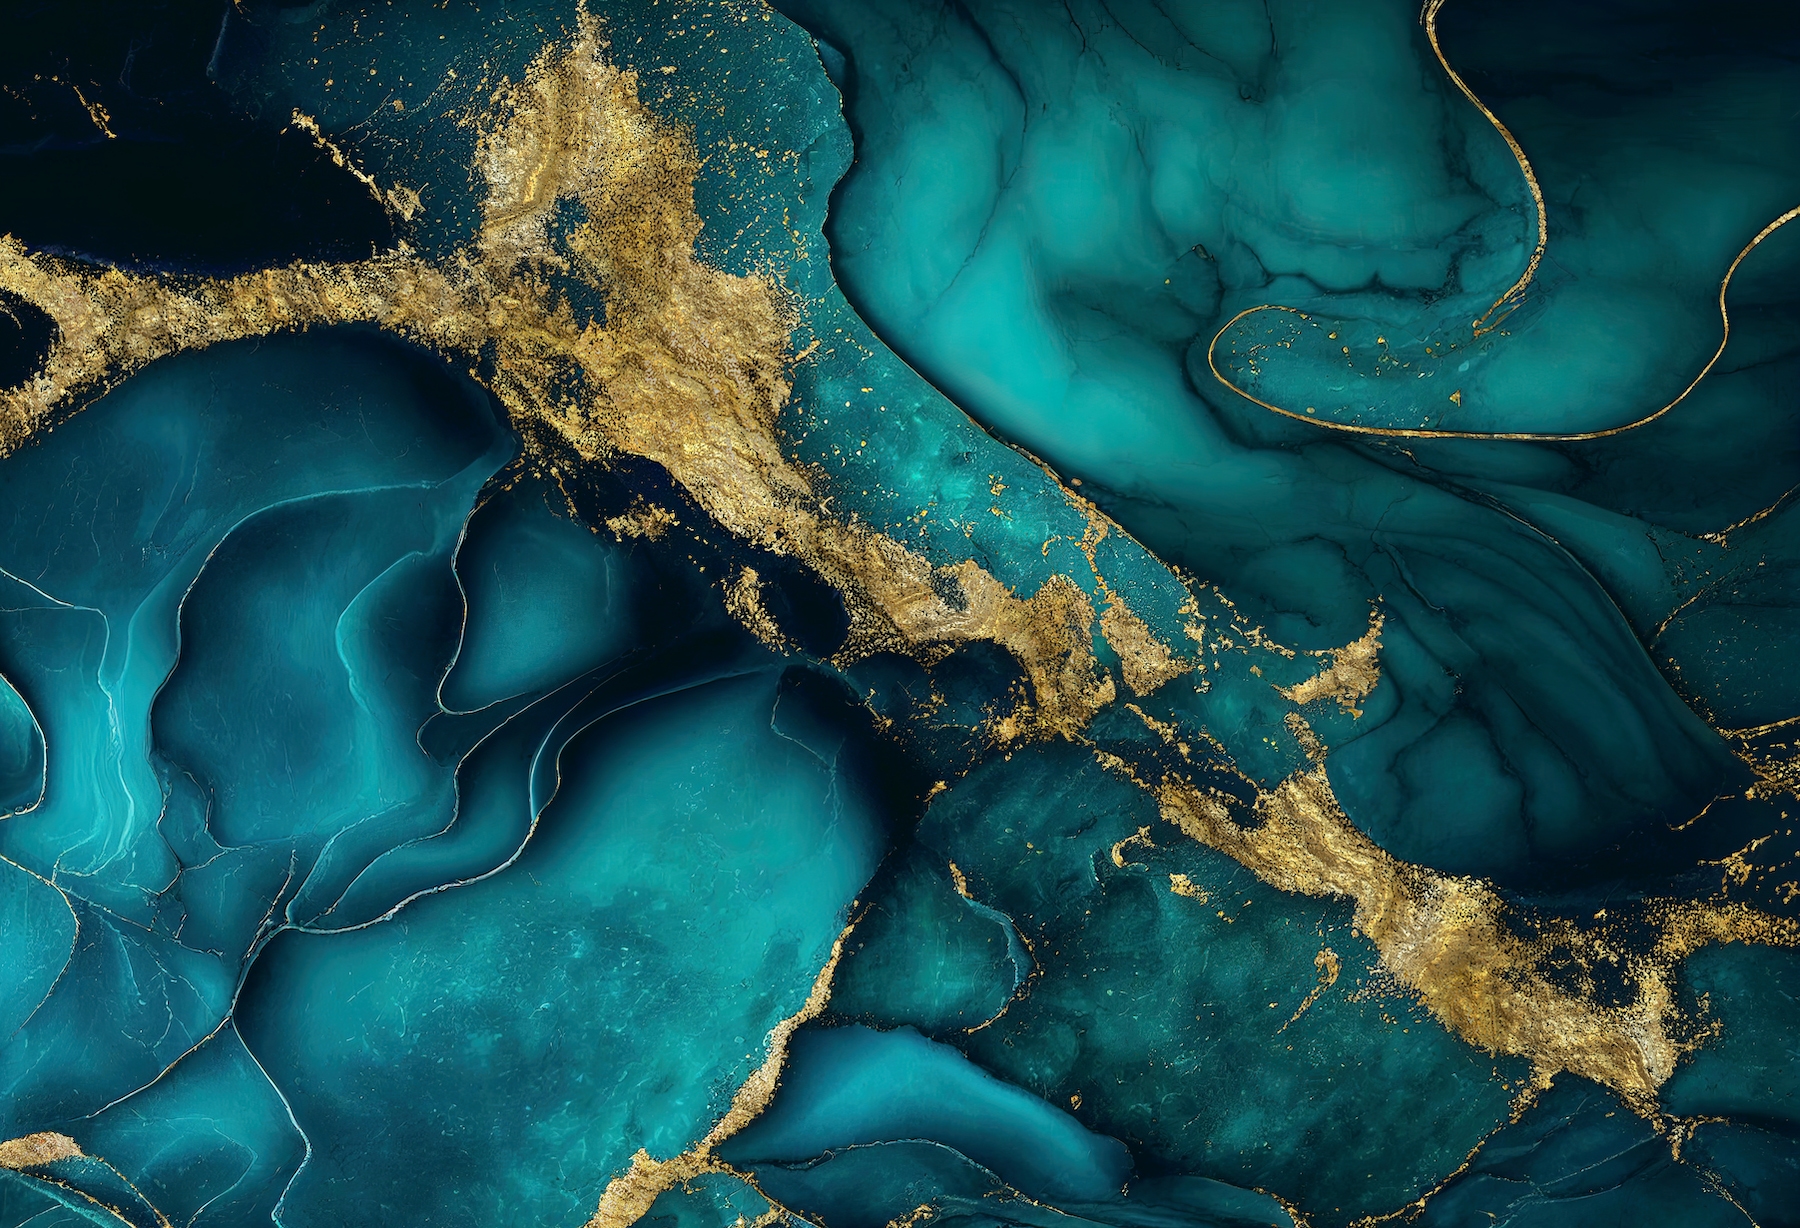 Teal Marble Gold Images  Free Photos PNG Stickers Wallpapers   Backgrounds  rawpixel